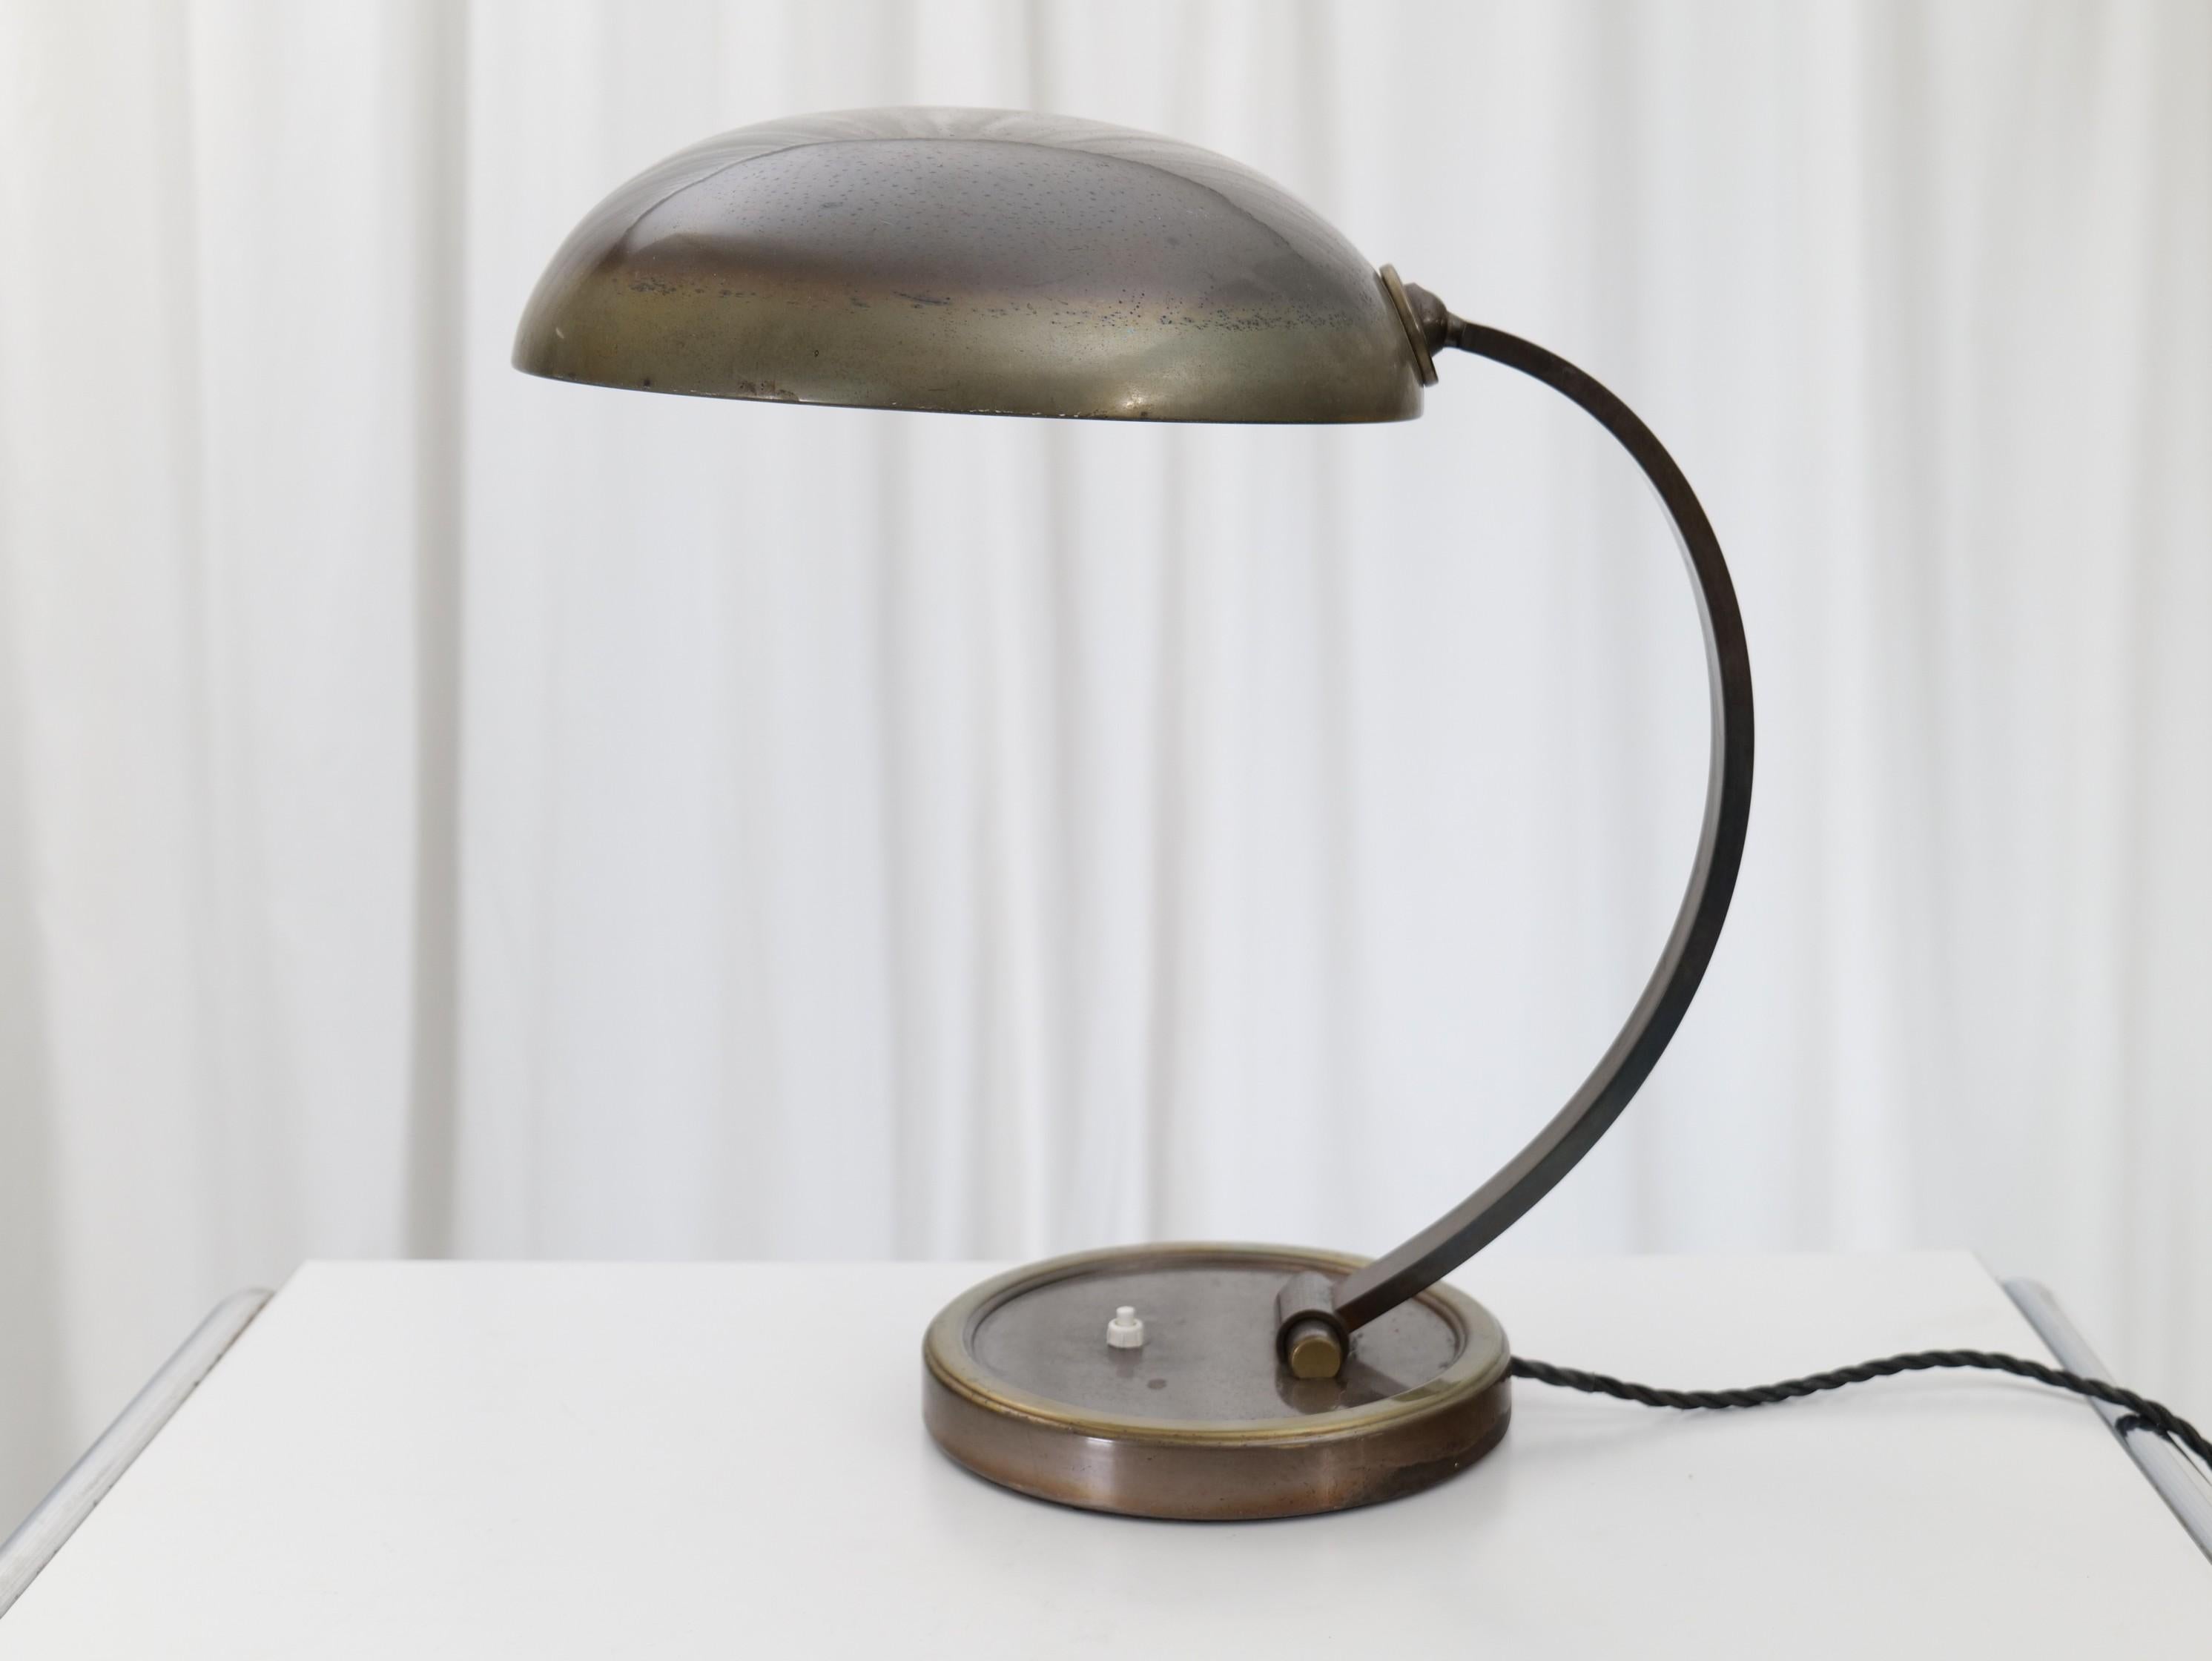 Very rare burnished brass lamp from Gecos Brothers Cosack from the 1930s. With two tilt adjustments. Excellent workmanship and typical industrial design.

Dimensions:
50 cm height
30 cm width
 

up to 250 V - EU plug.